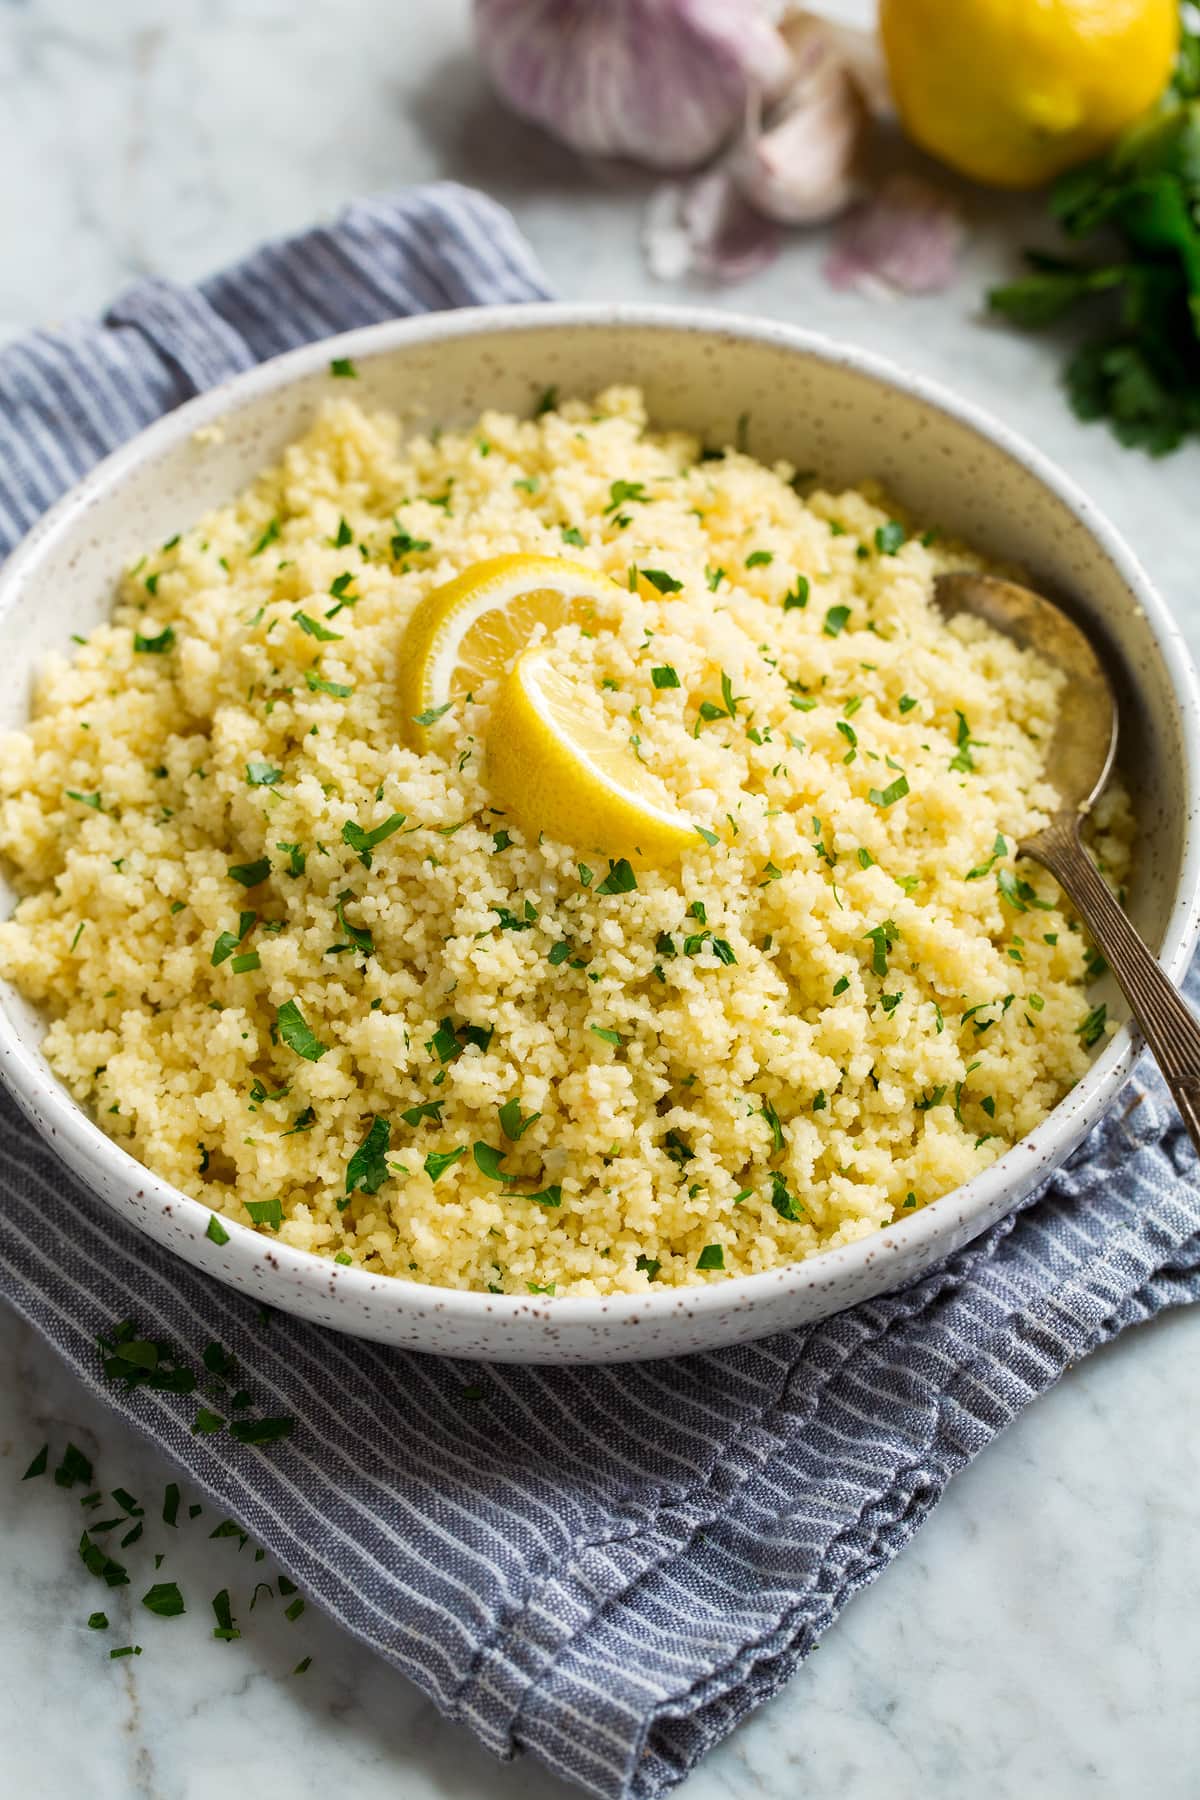 Lemon couscous shown in a white bowl over a grey striped cloth.